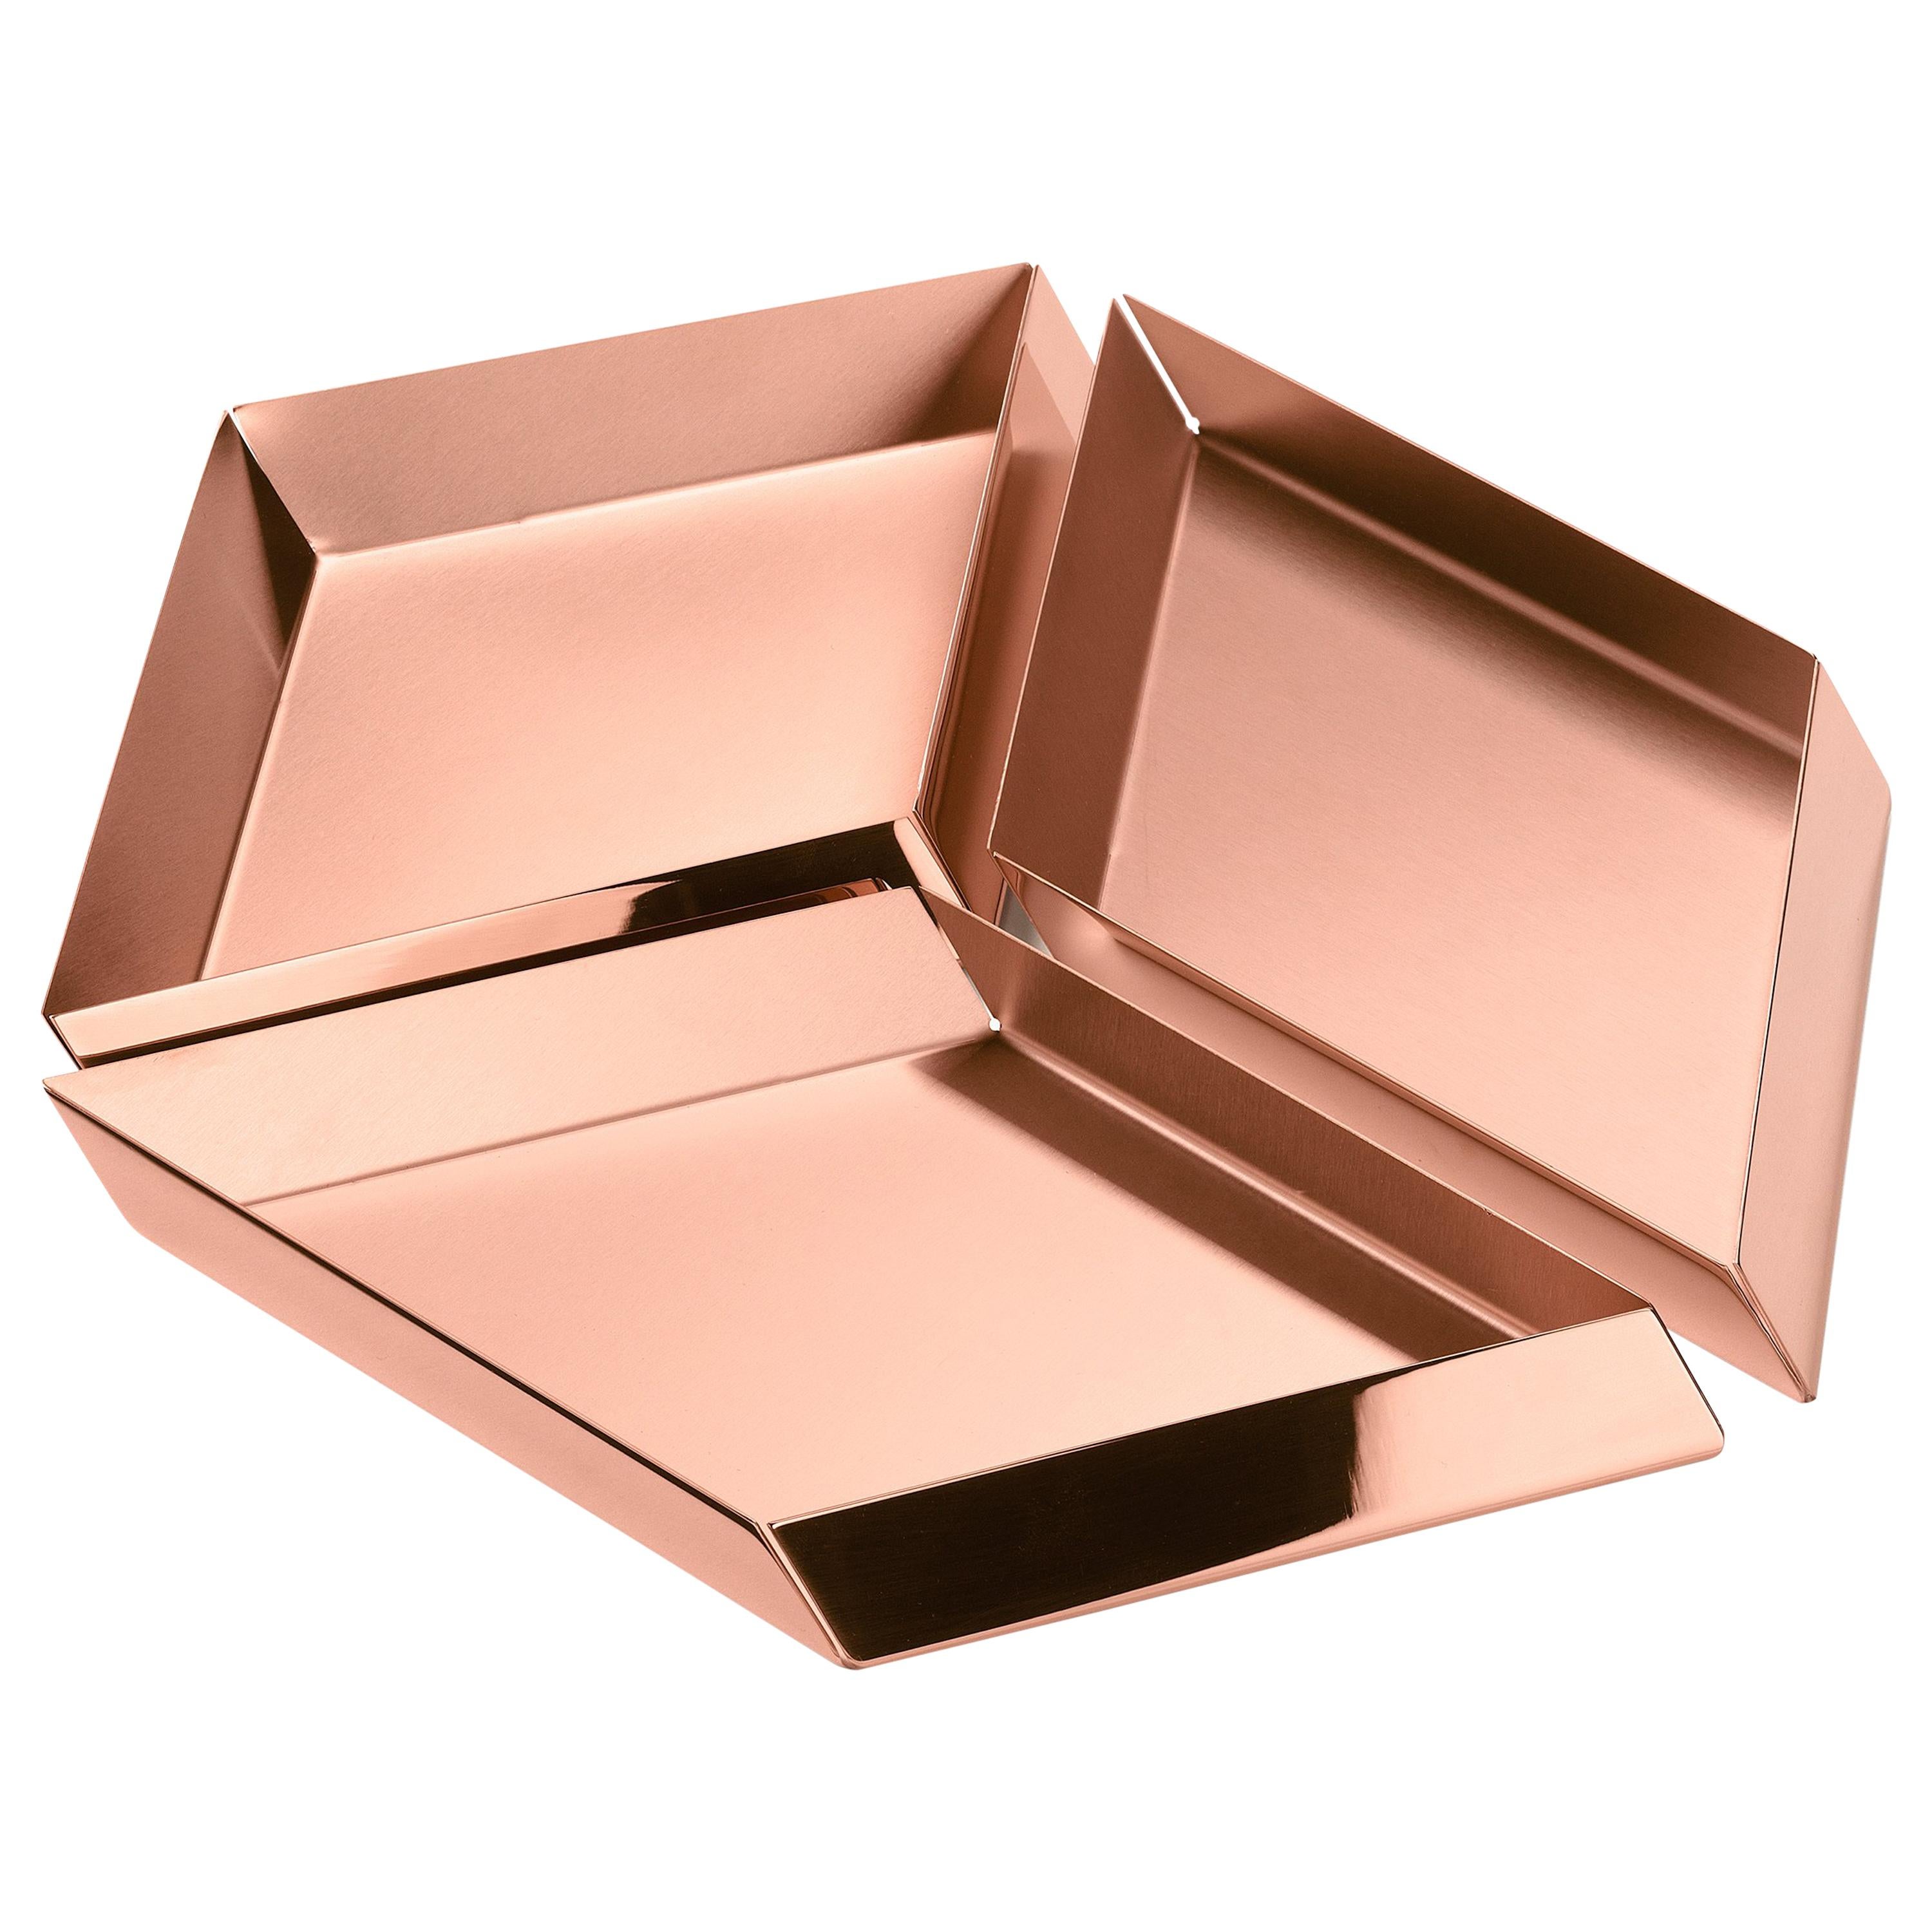 Ghidini 1961 Axonometry Large Cube Tray in Copper by Elisa Giovanni For Sale